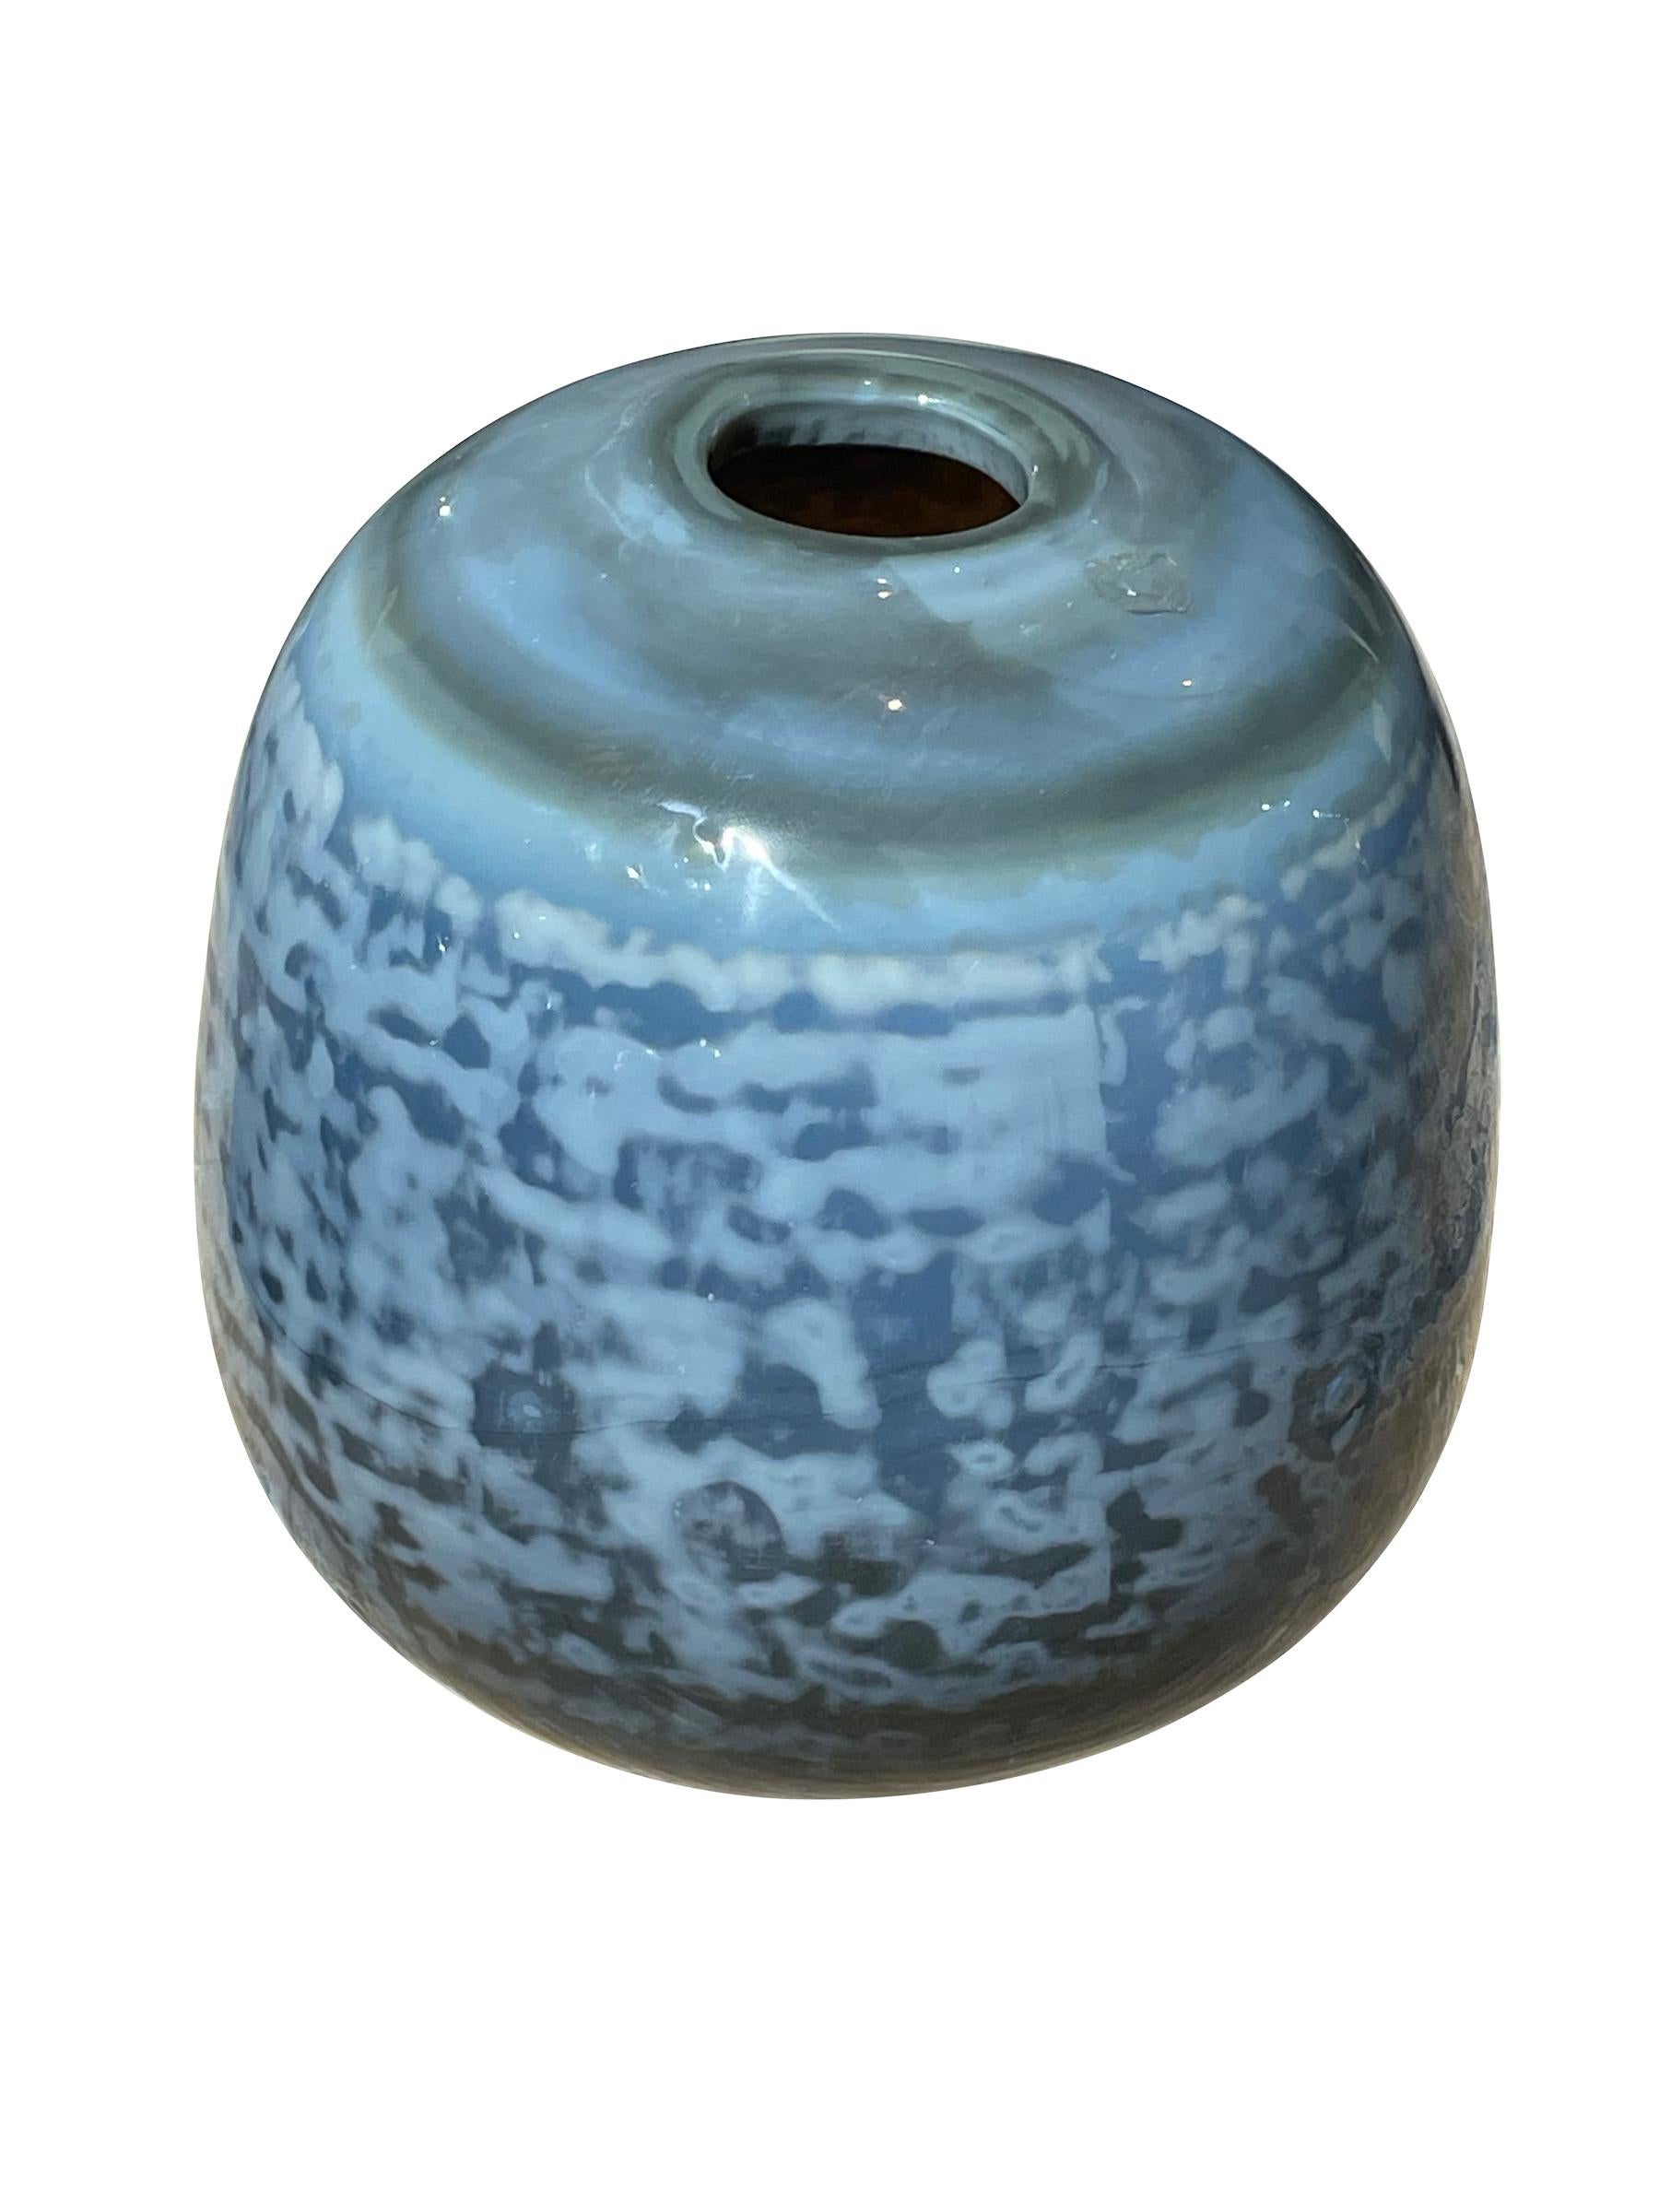 Contemporary Romanian glass vase with speckle design
Shades of blue, grey and green
Two available
ARRIVING APRIL